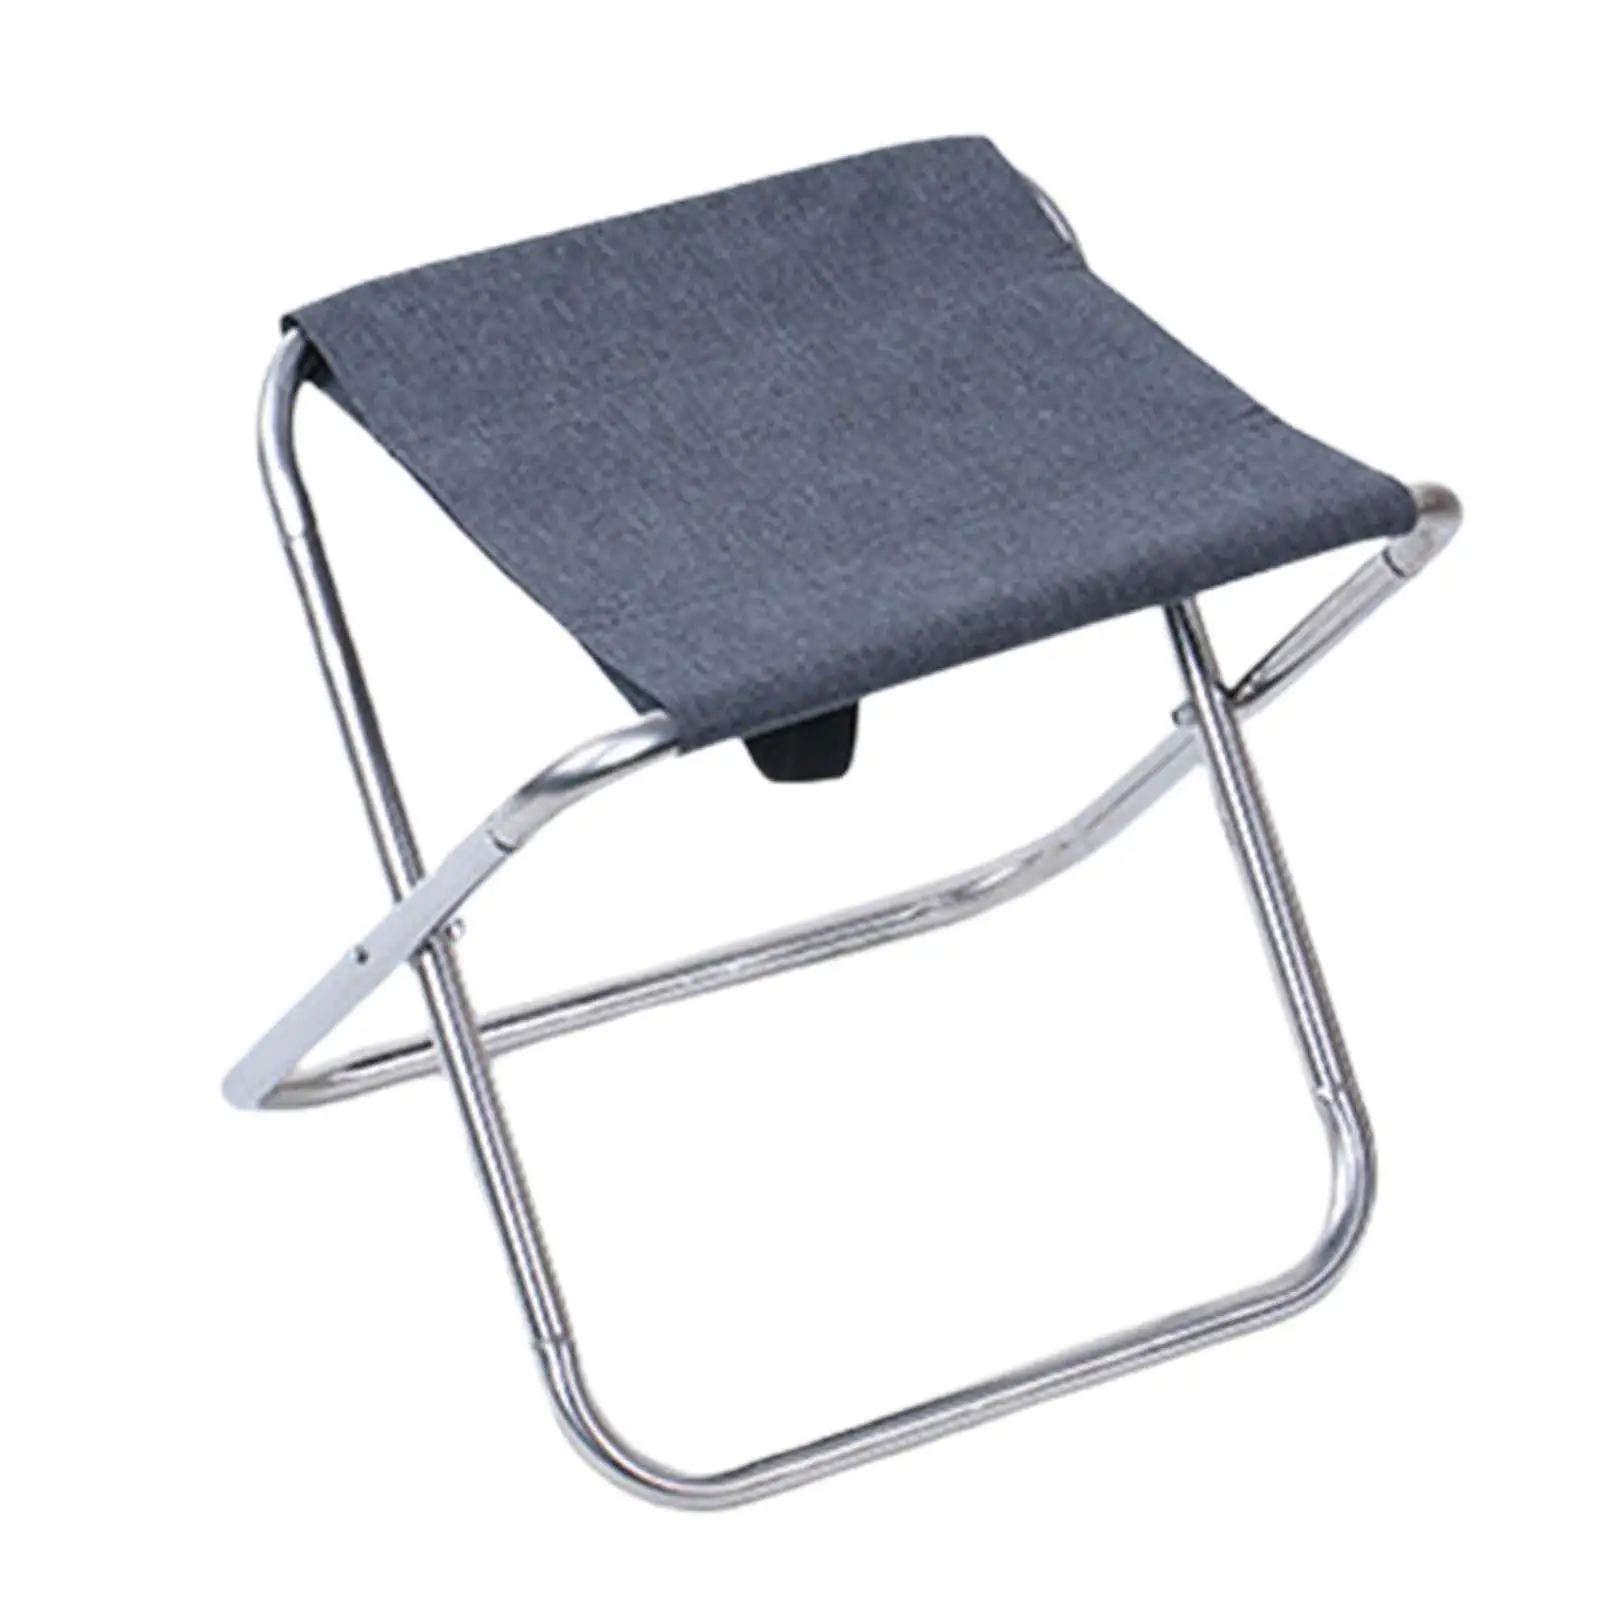 Camping Stool Folding Ultralight Wear Resistant Camp Stool Fishing Seat Fishing Chair for Hiking BBQ Traveling Fishing Picnic